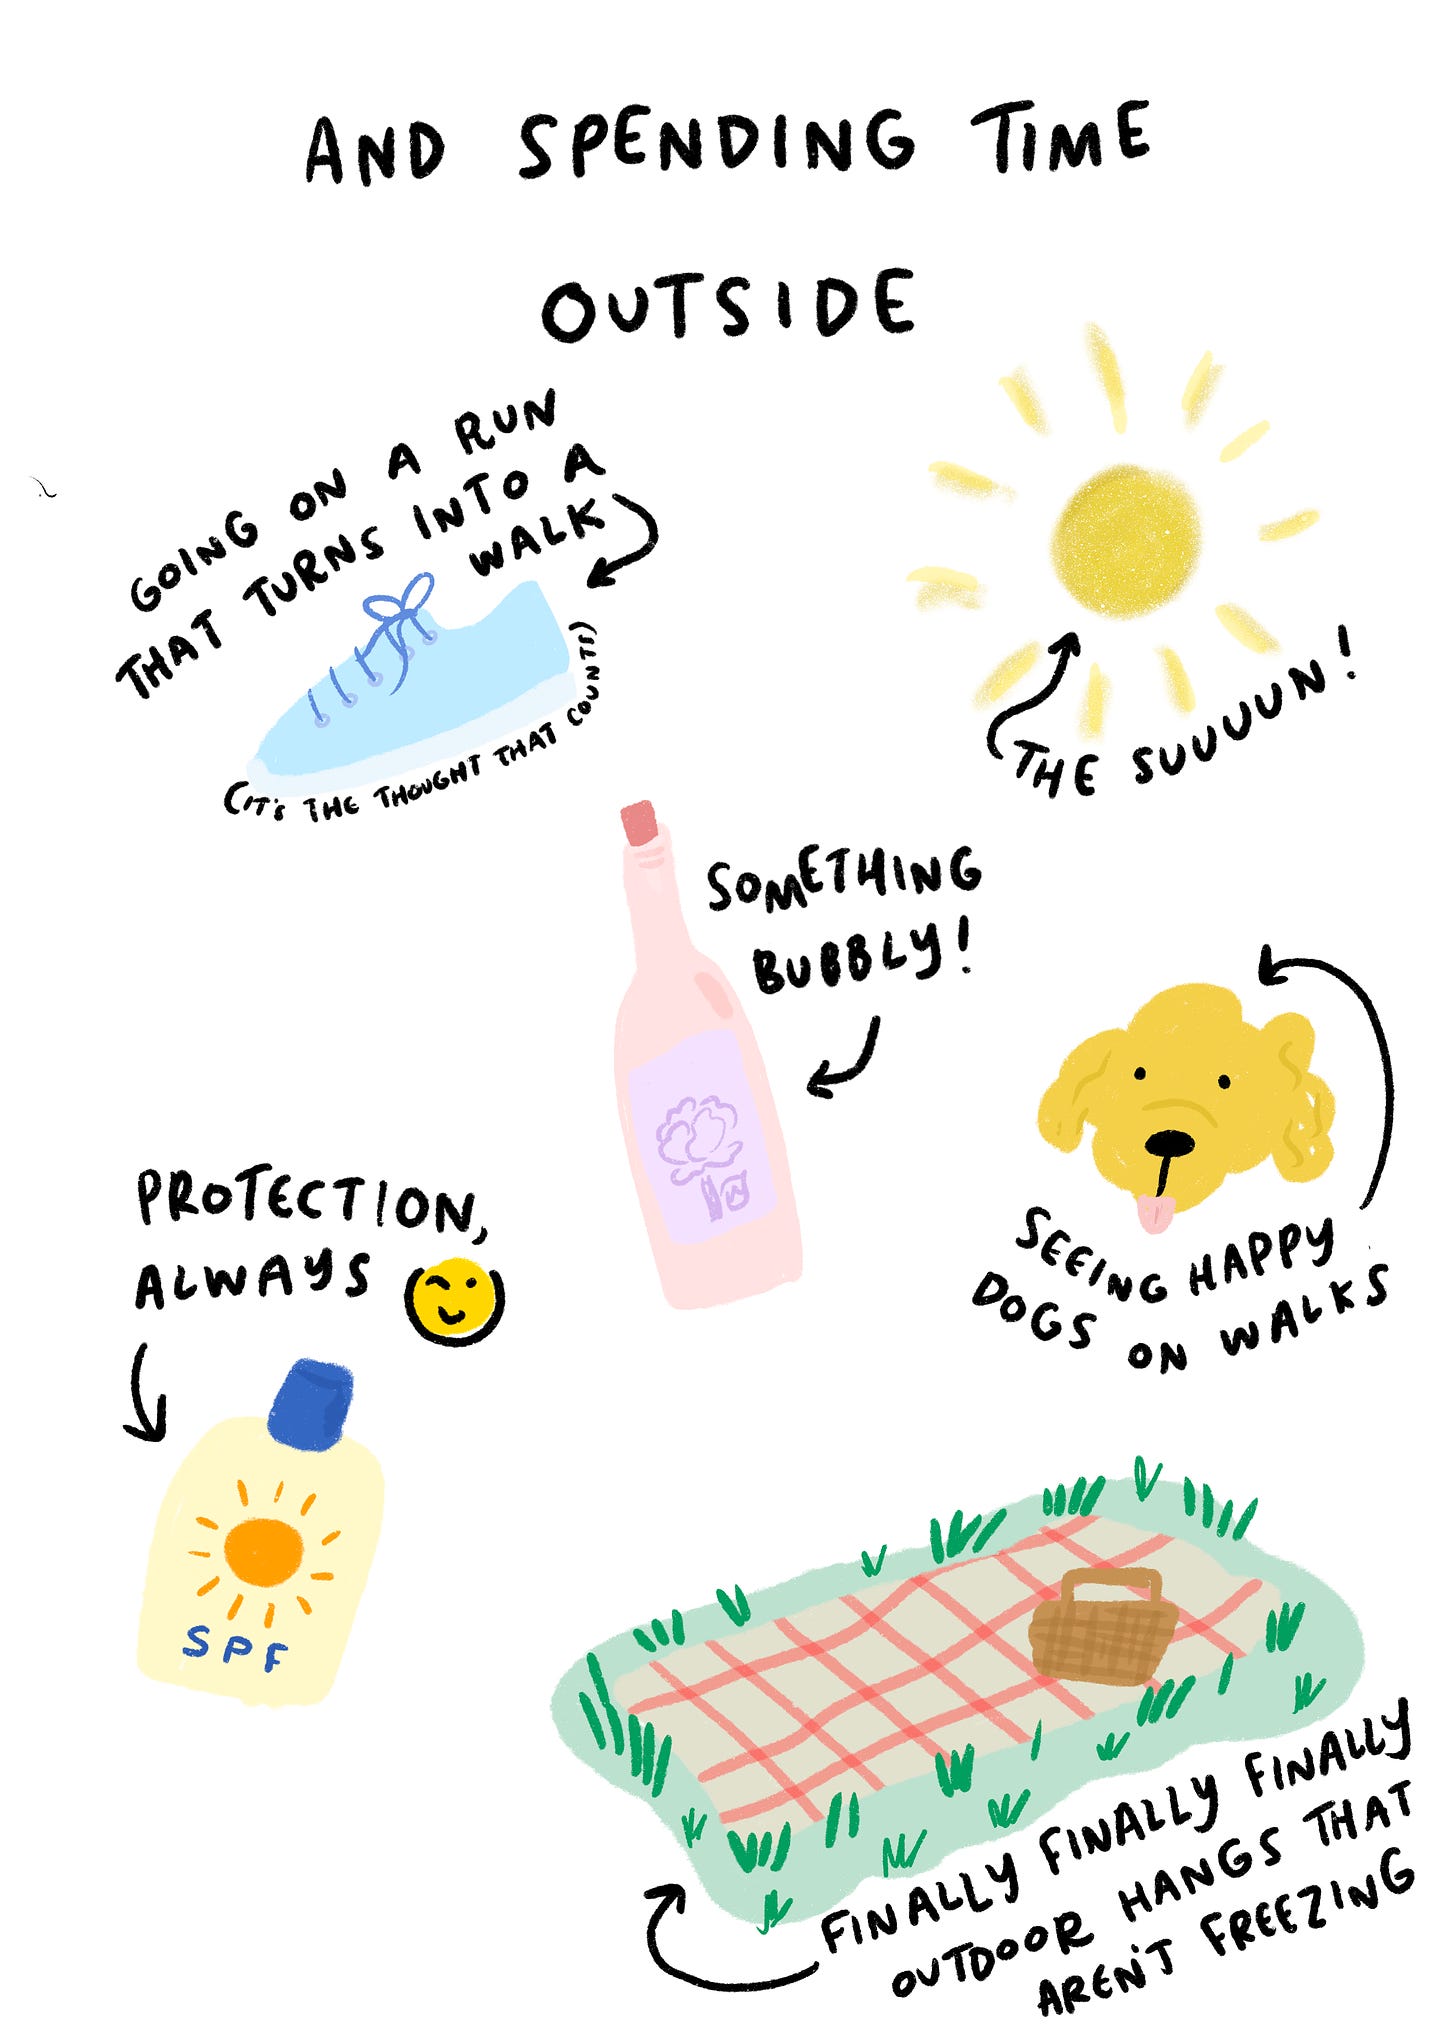 text reads: And spending time outside. Pictured below are a pair of running shoes, the sun, bubbly rose, a dog, sunscreen, and a picnic